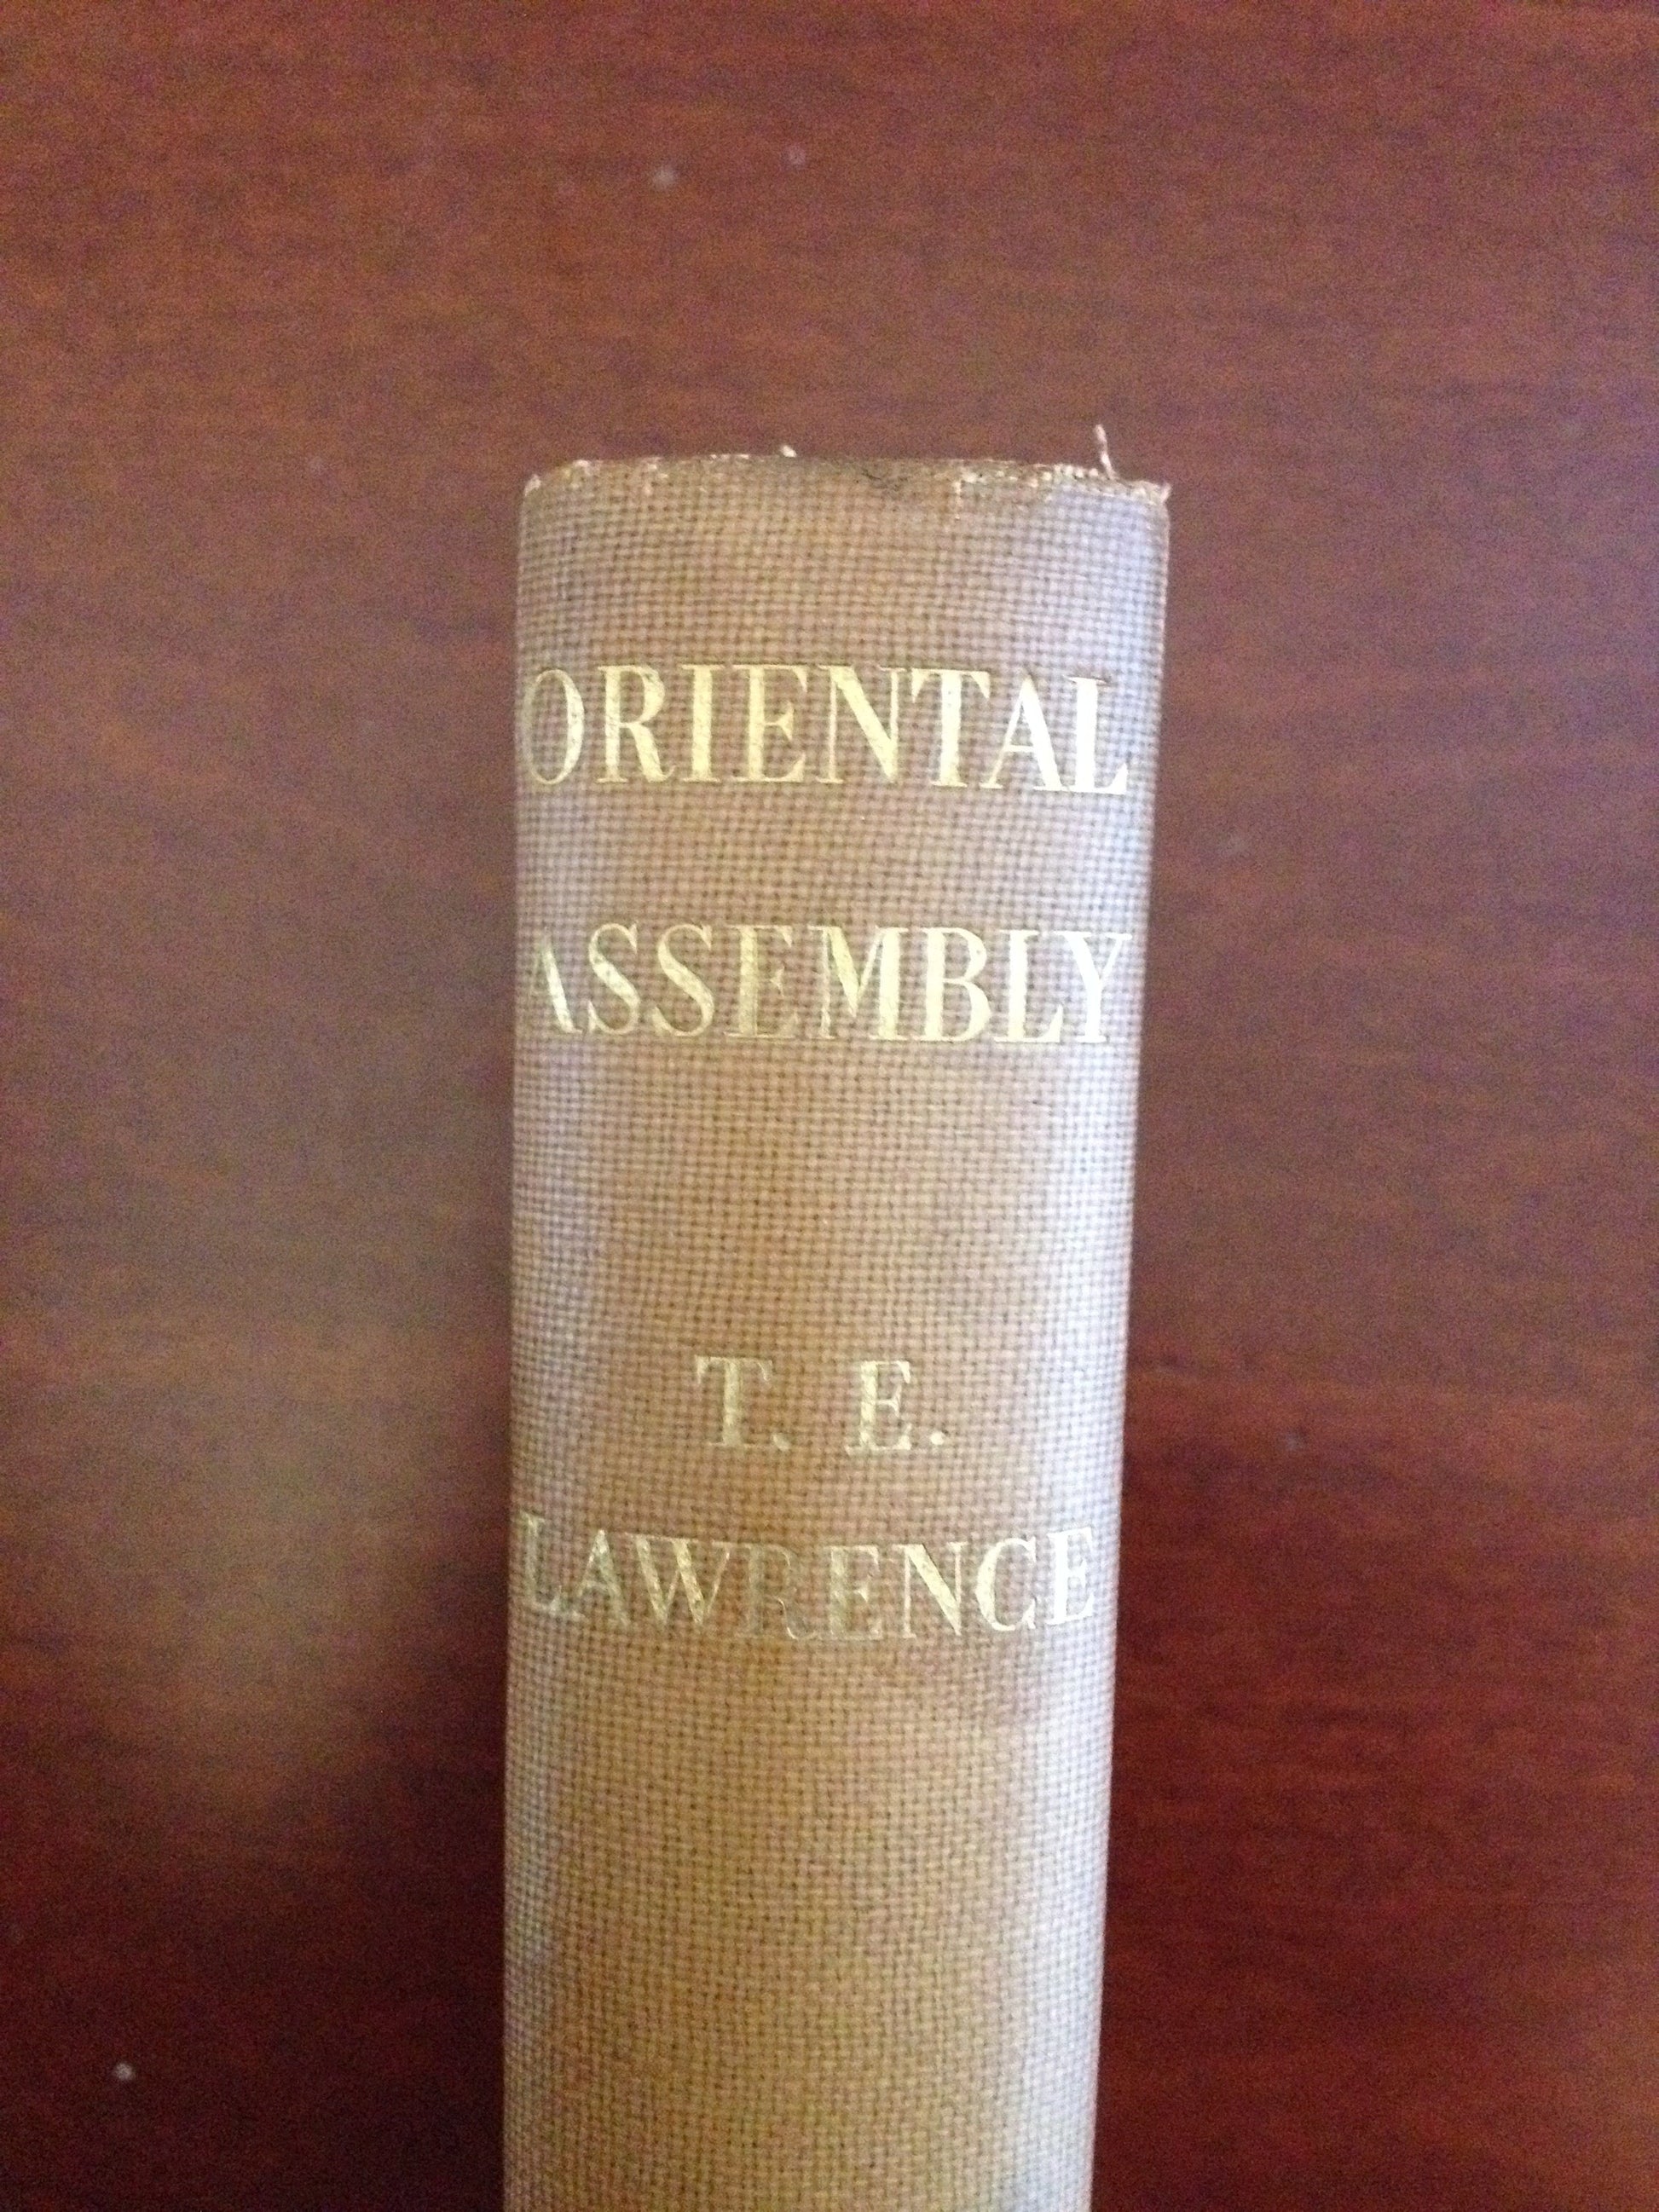 ORIENTAL ASSEMBLY  BY: TE LAWRENCE BooksCardsNBikes